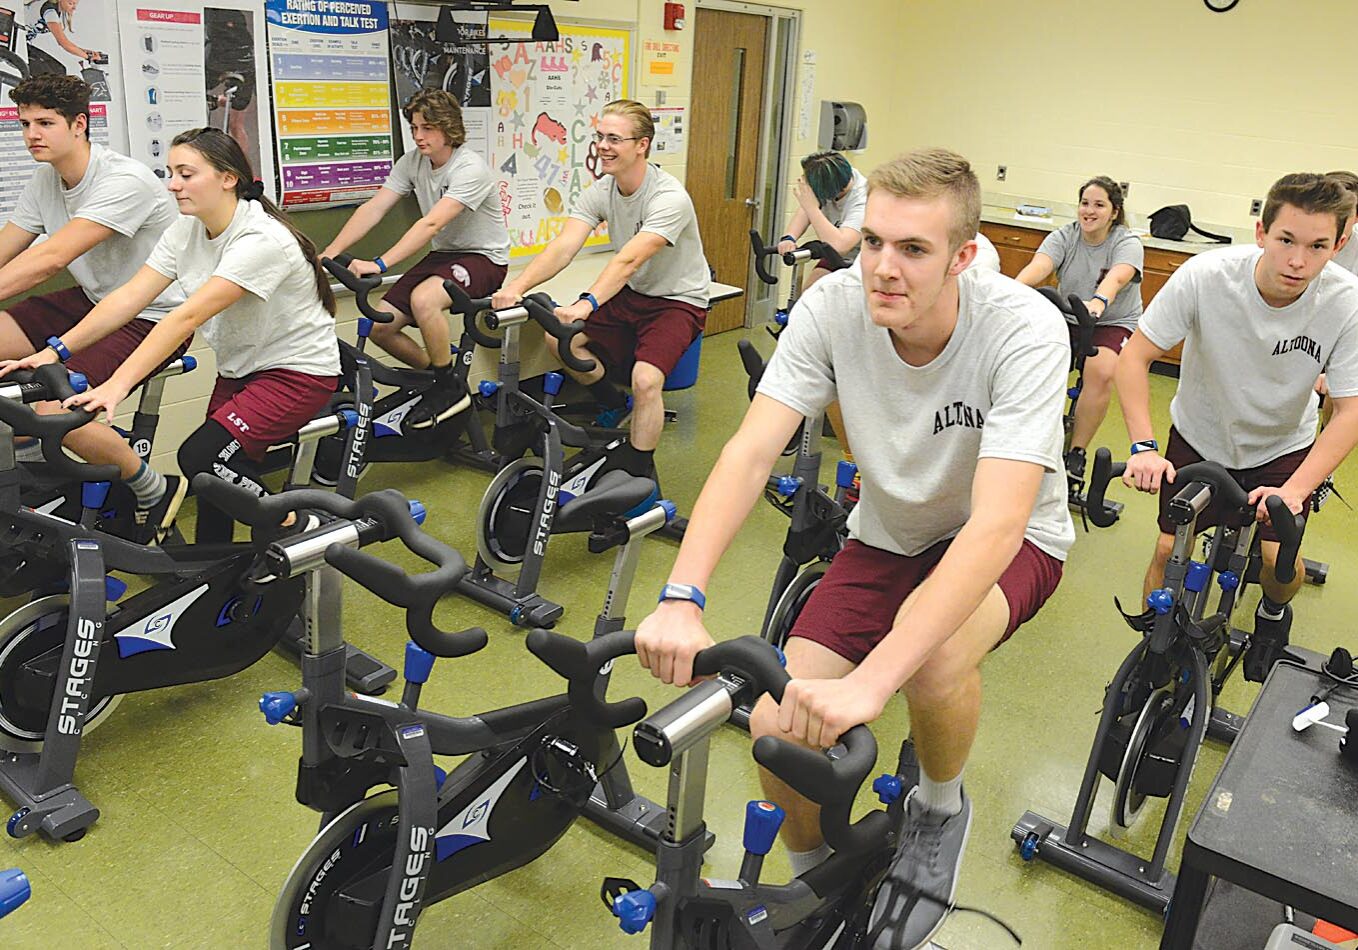 A group of people riding stationary bikes in a gym.